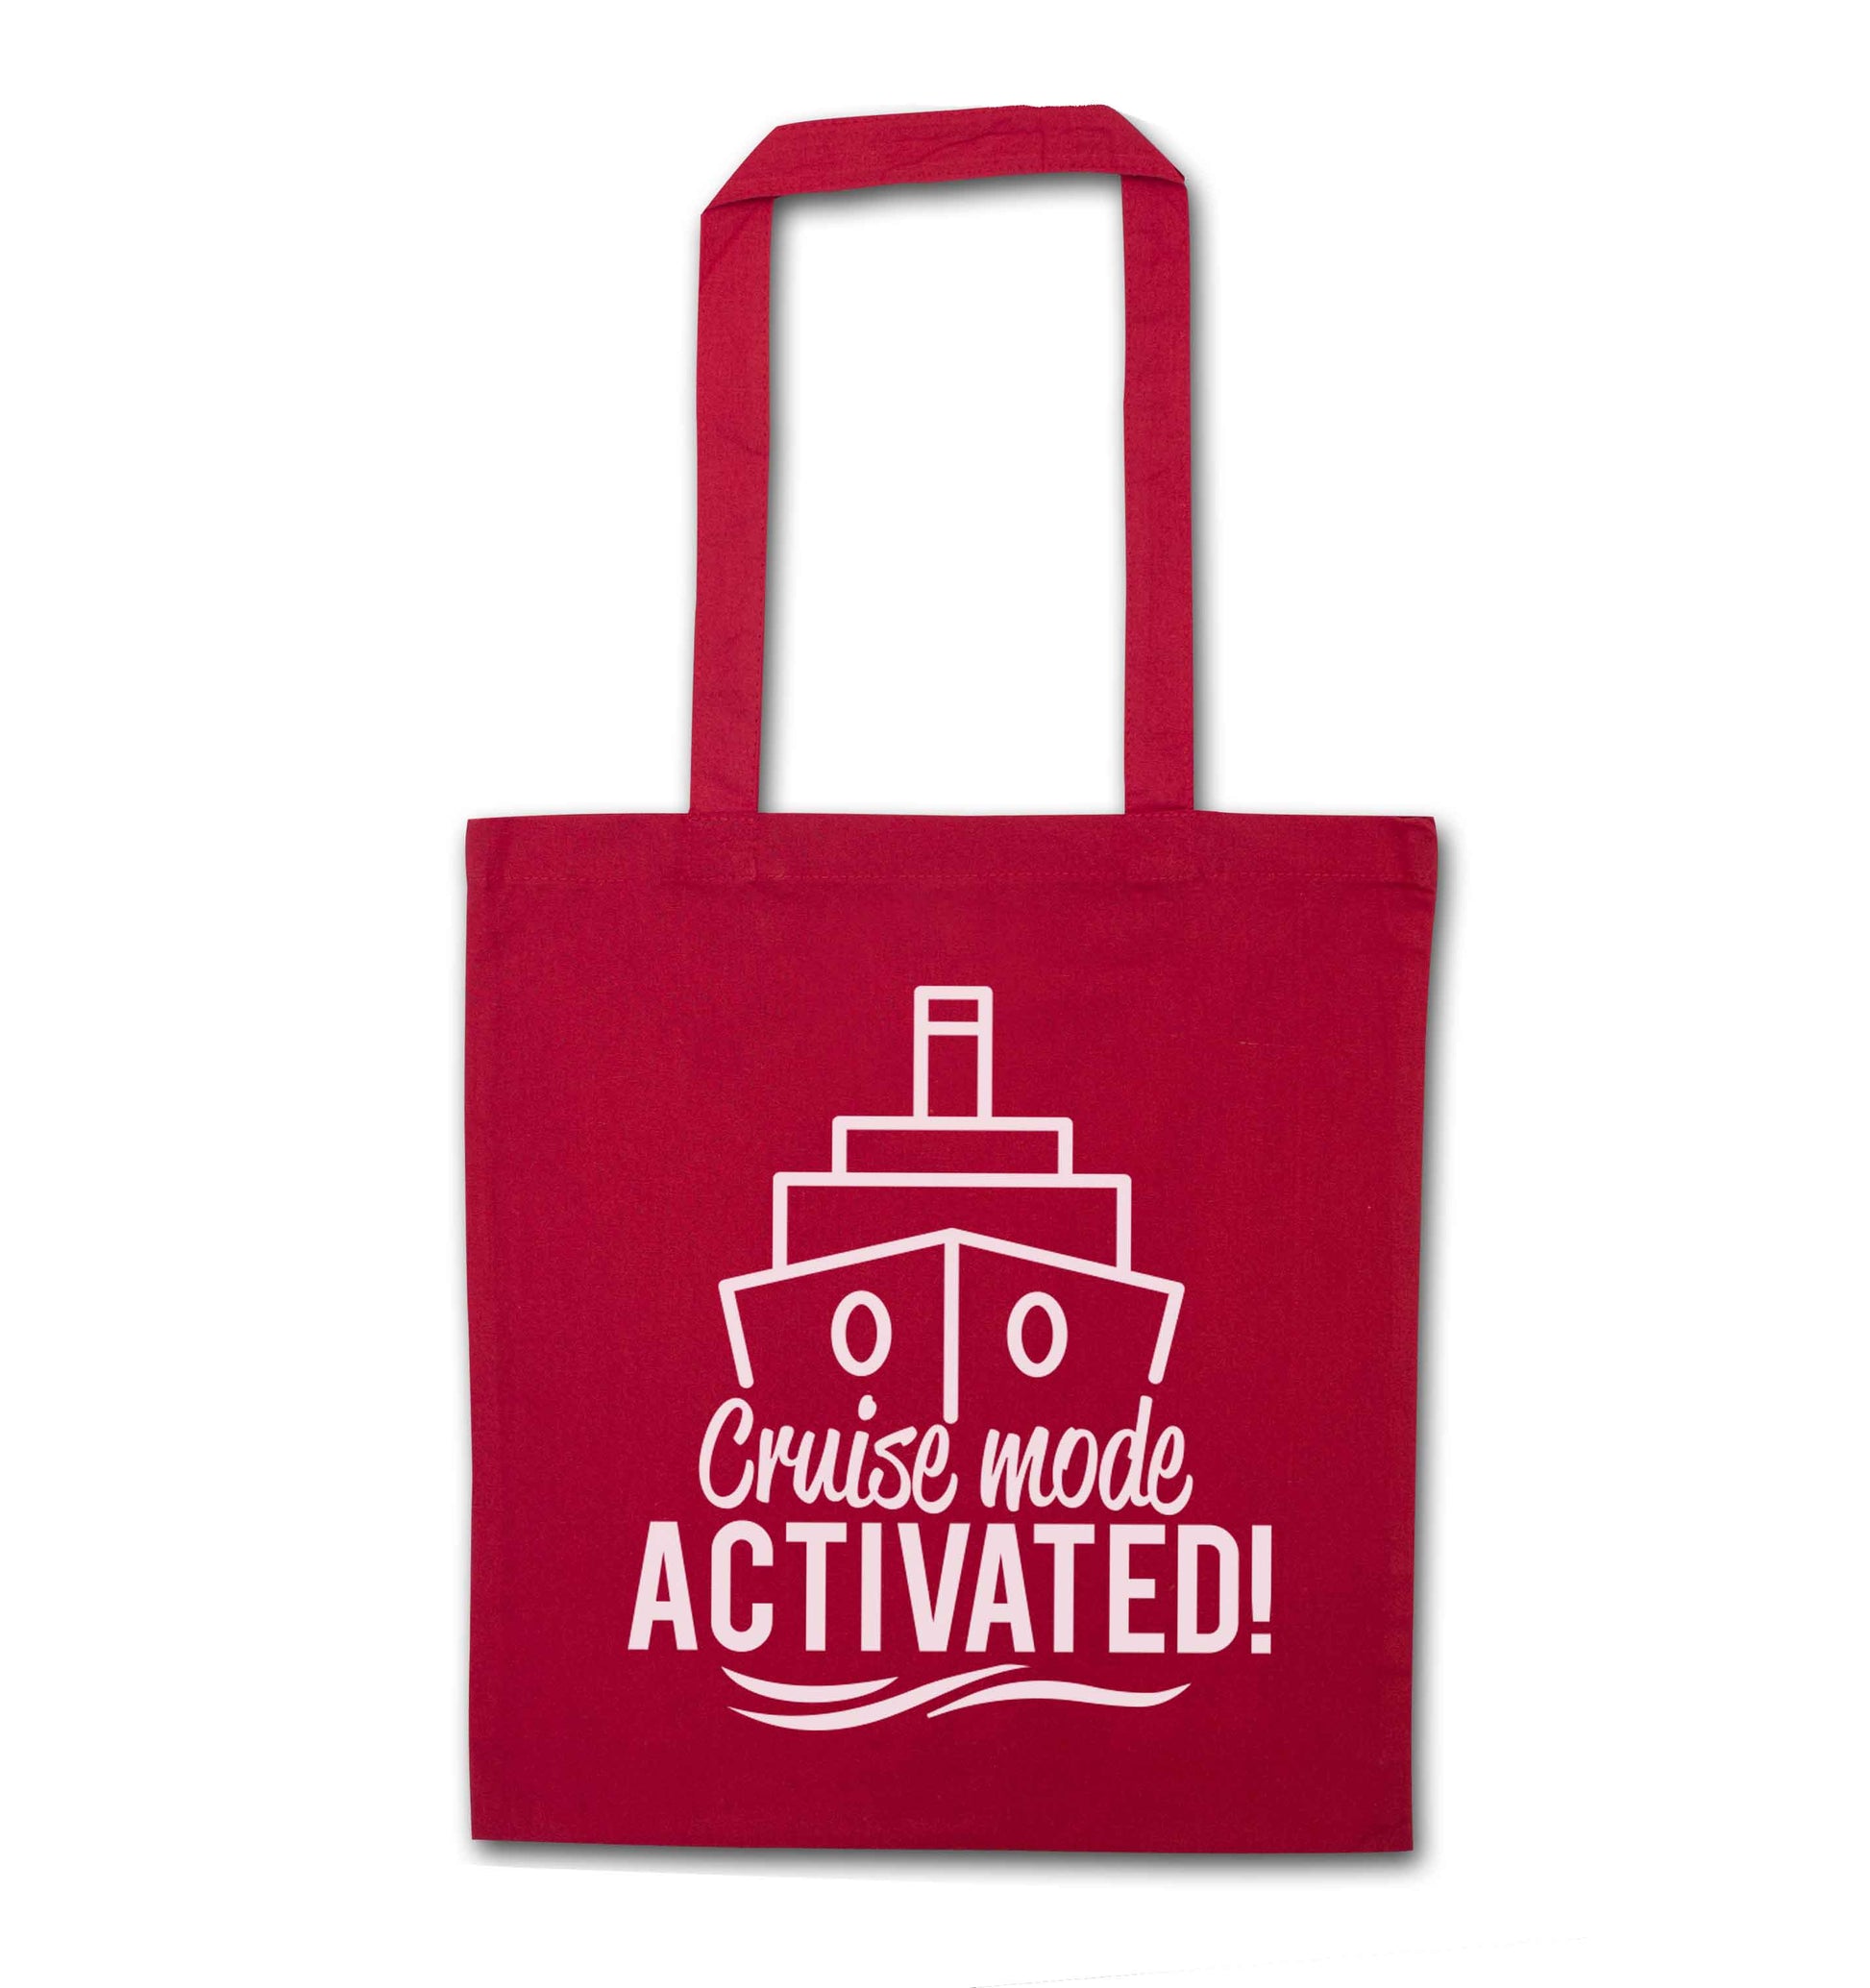 Cruise mode activated red tote bag